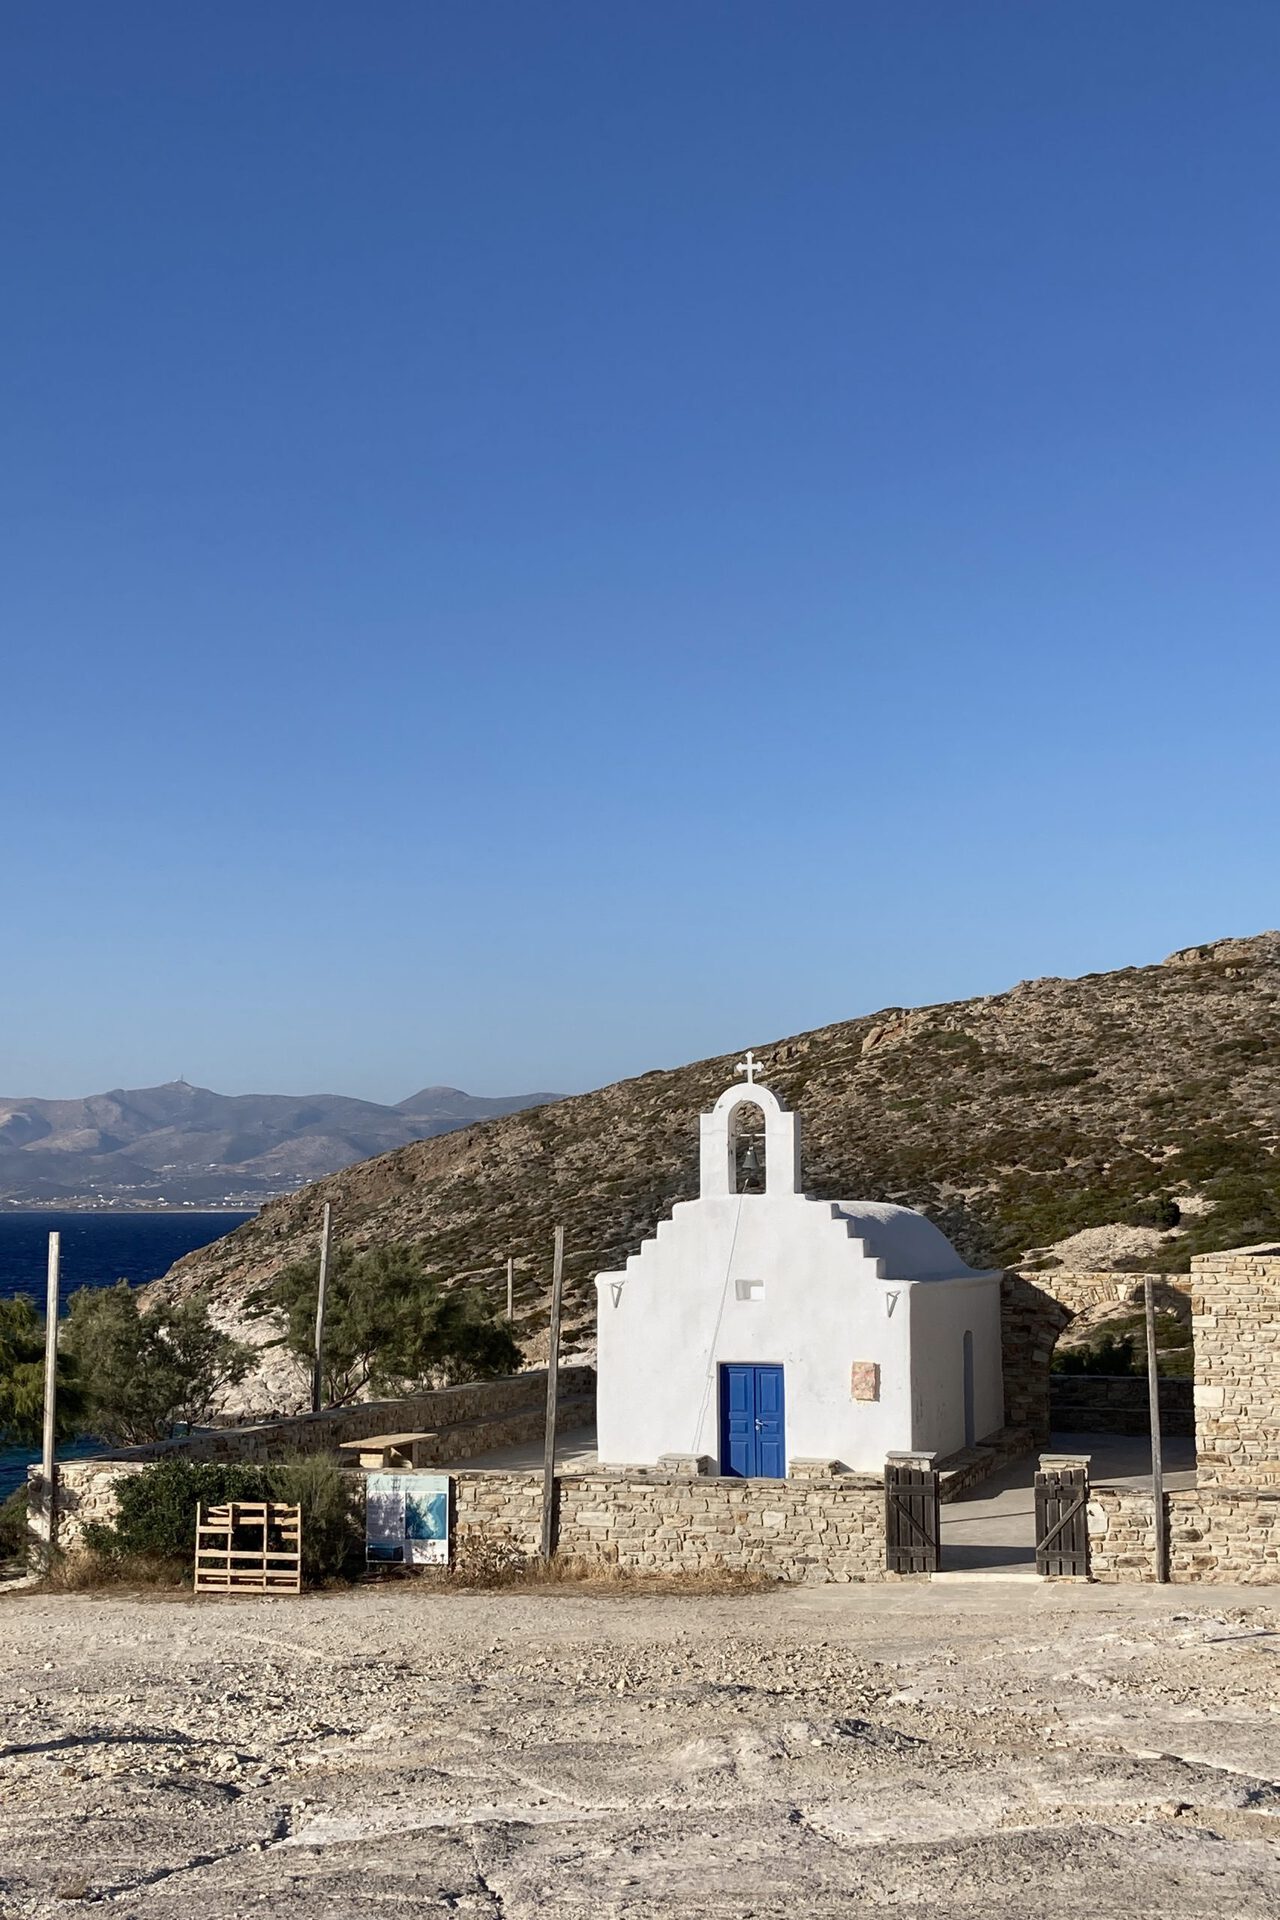 Ishai Shapira Kalter, "Eighth Stop: Foromaneri Church", 2021. From Kolymbithres, drive to the pier in Pounta. Every half an hour the ferry line that connects Paros and Antiparos arrives. Drive your car aboard. From there, on paved roads that turn into dirt roads, pass several pristine beaches until you reach Faneromeni Church, which is built on the shoreline - where the last assemblage is located, created especially for the gaze of two lovers.